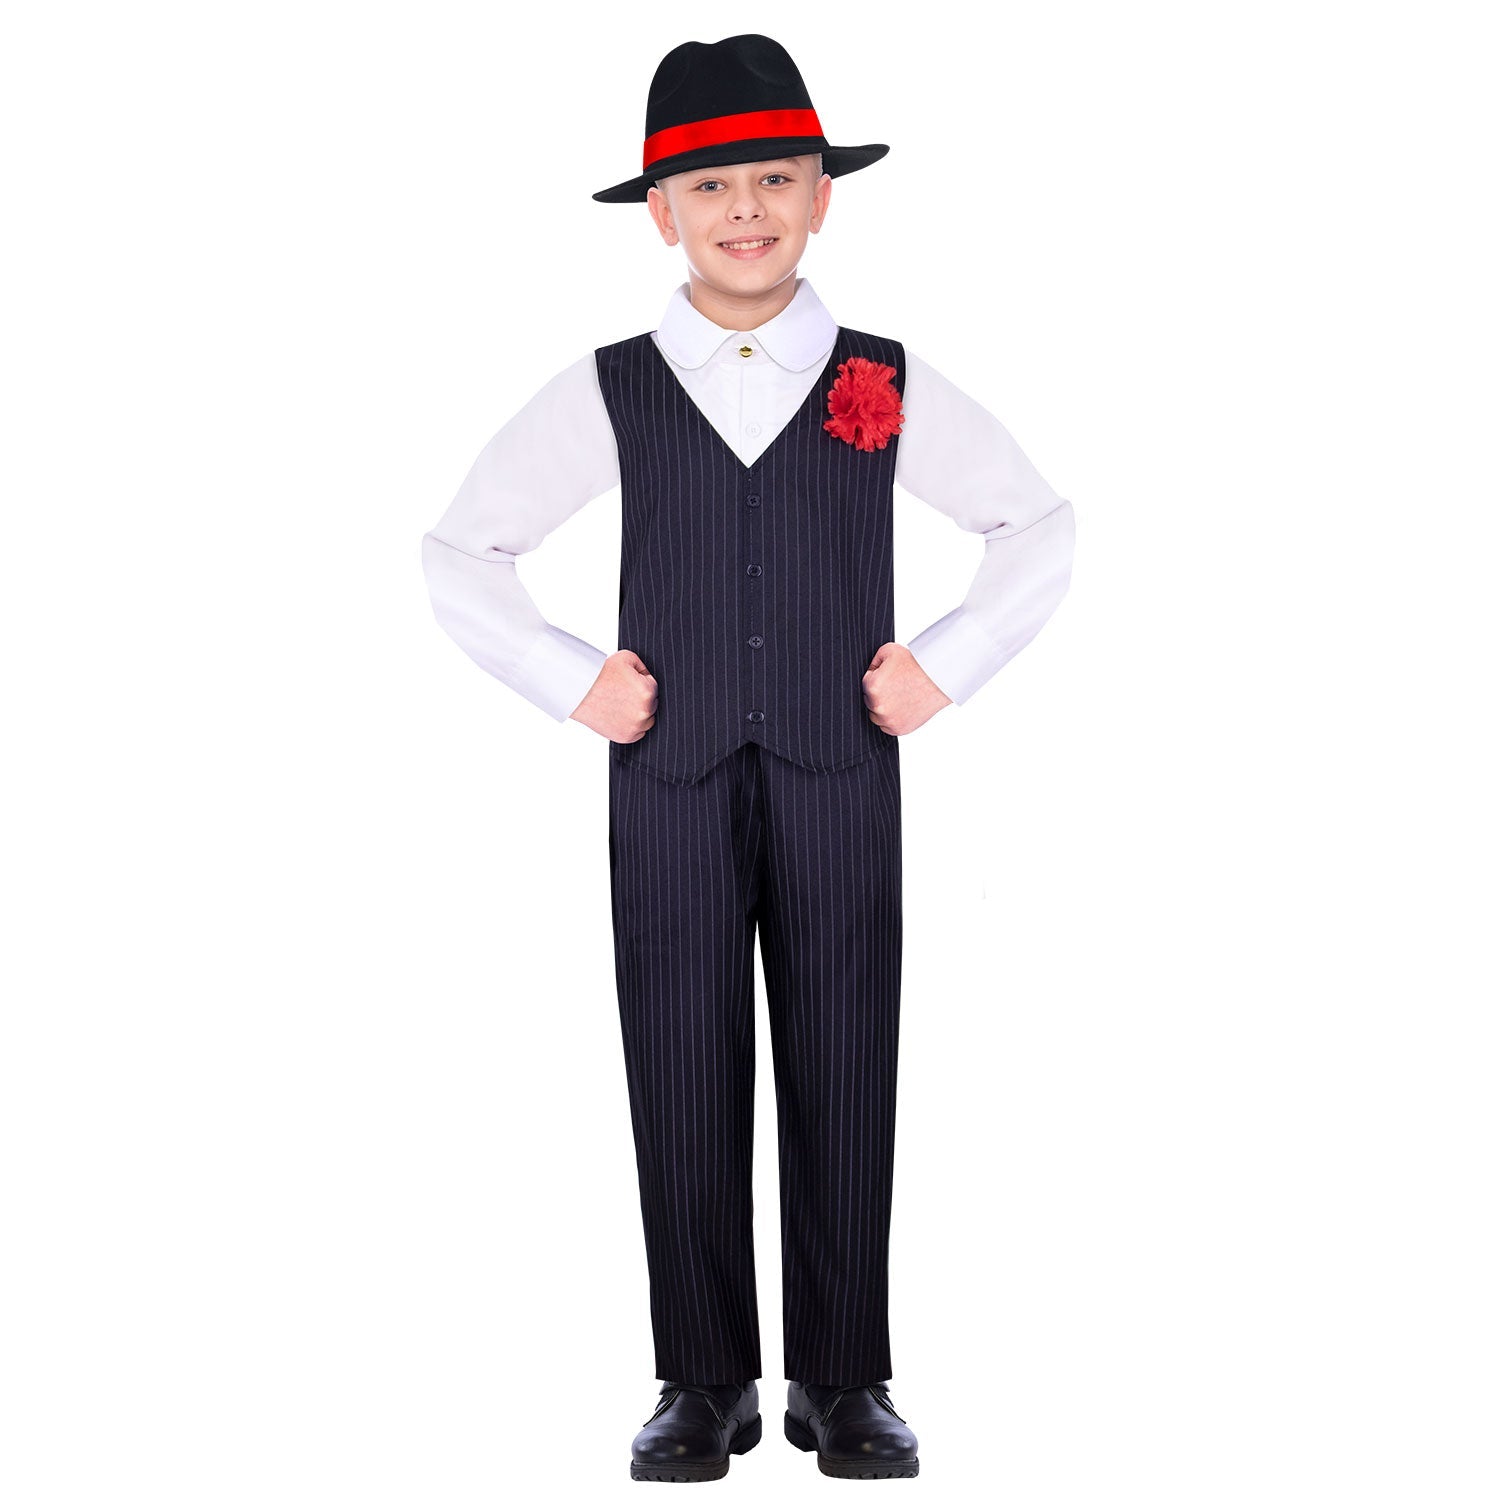 Gangster Boy Costume includes shirt with mock waistcoat, trousers and hat